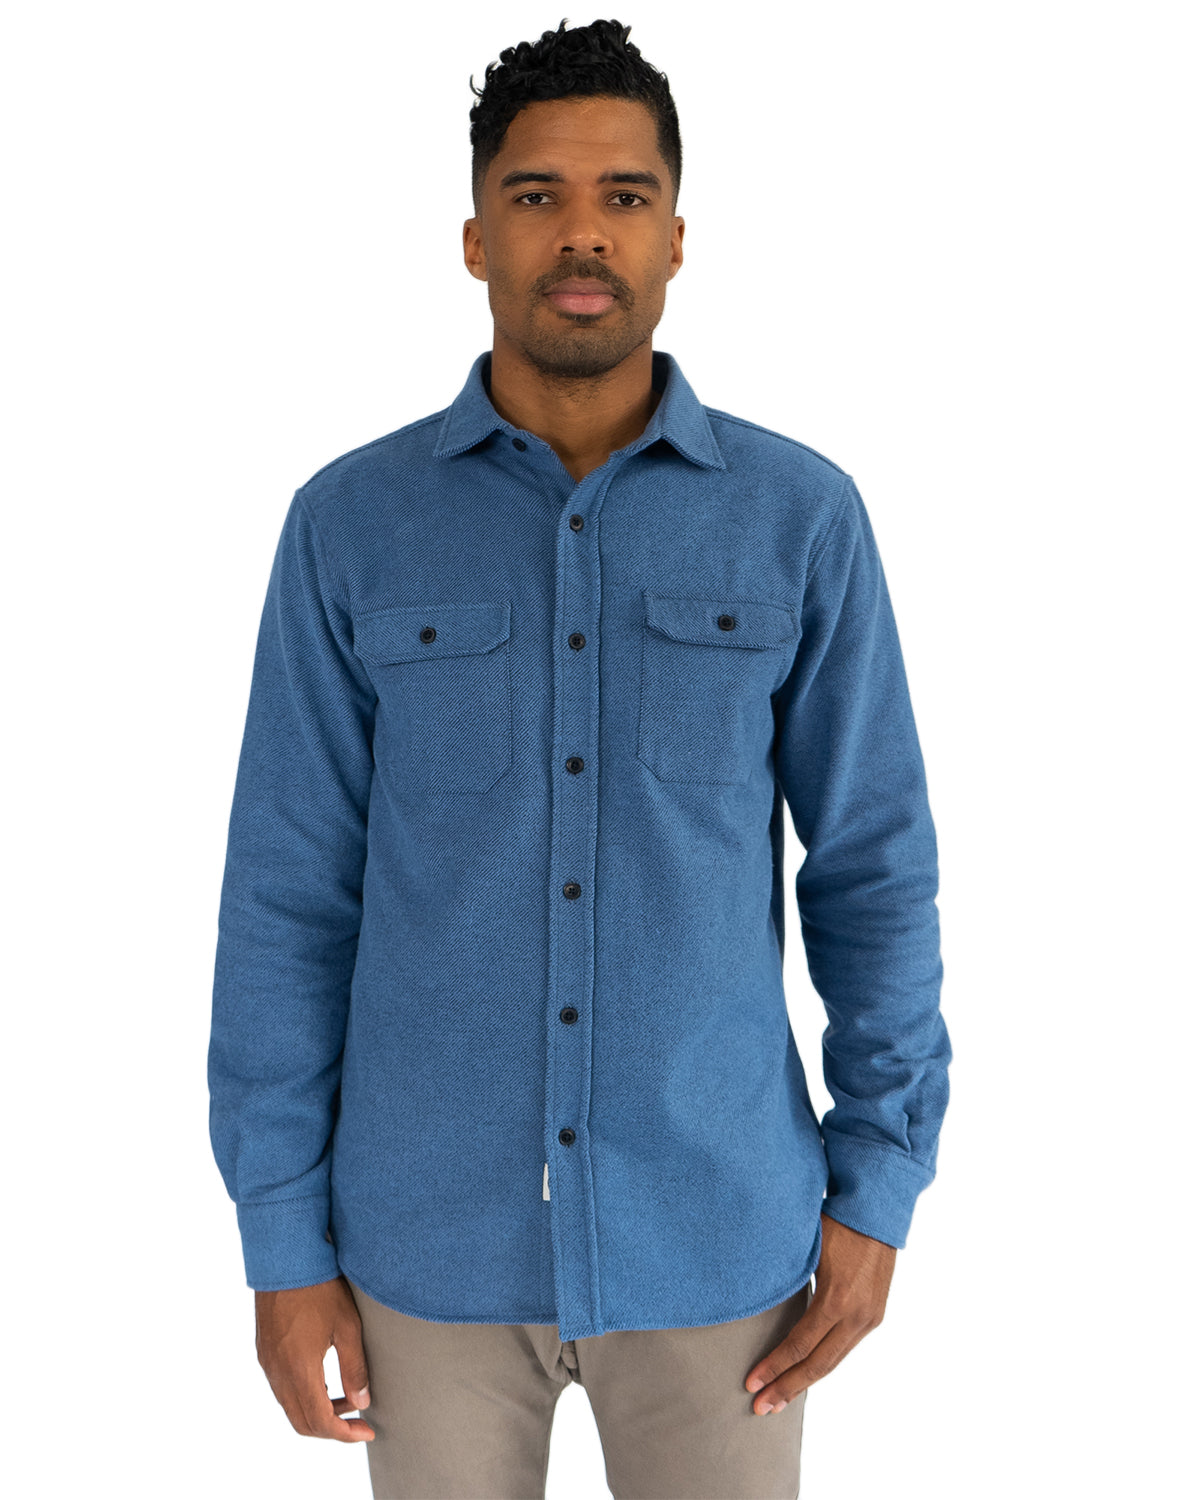 Soft Flannel Shirt for Men in 100% Cotton, The Grand Flannel in Solid ...